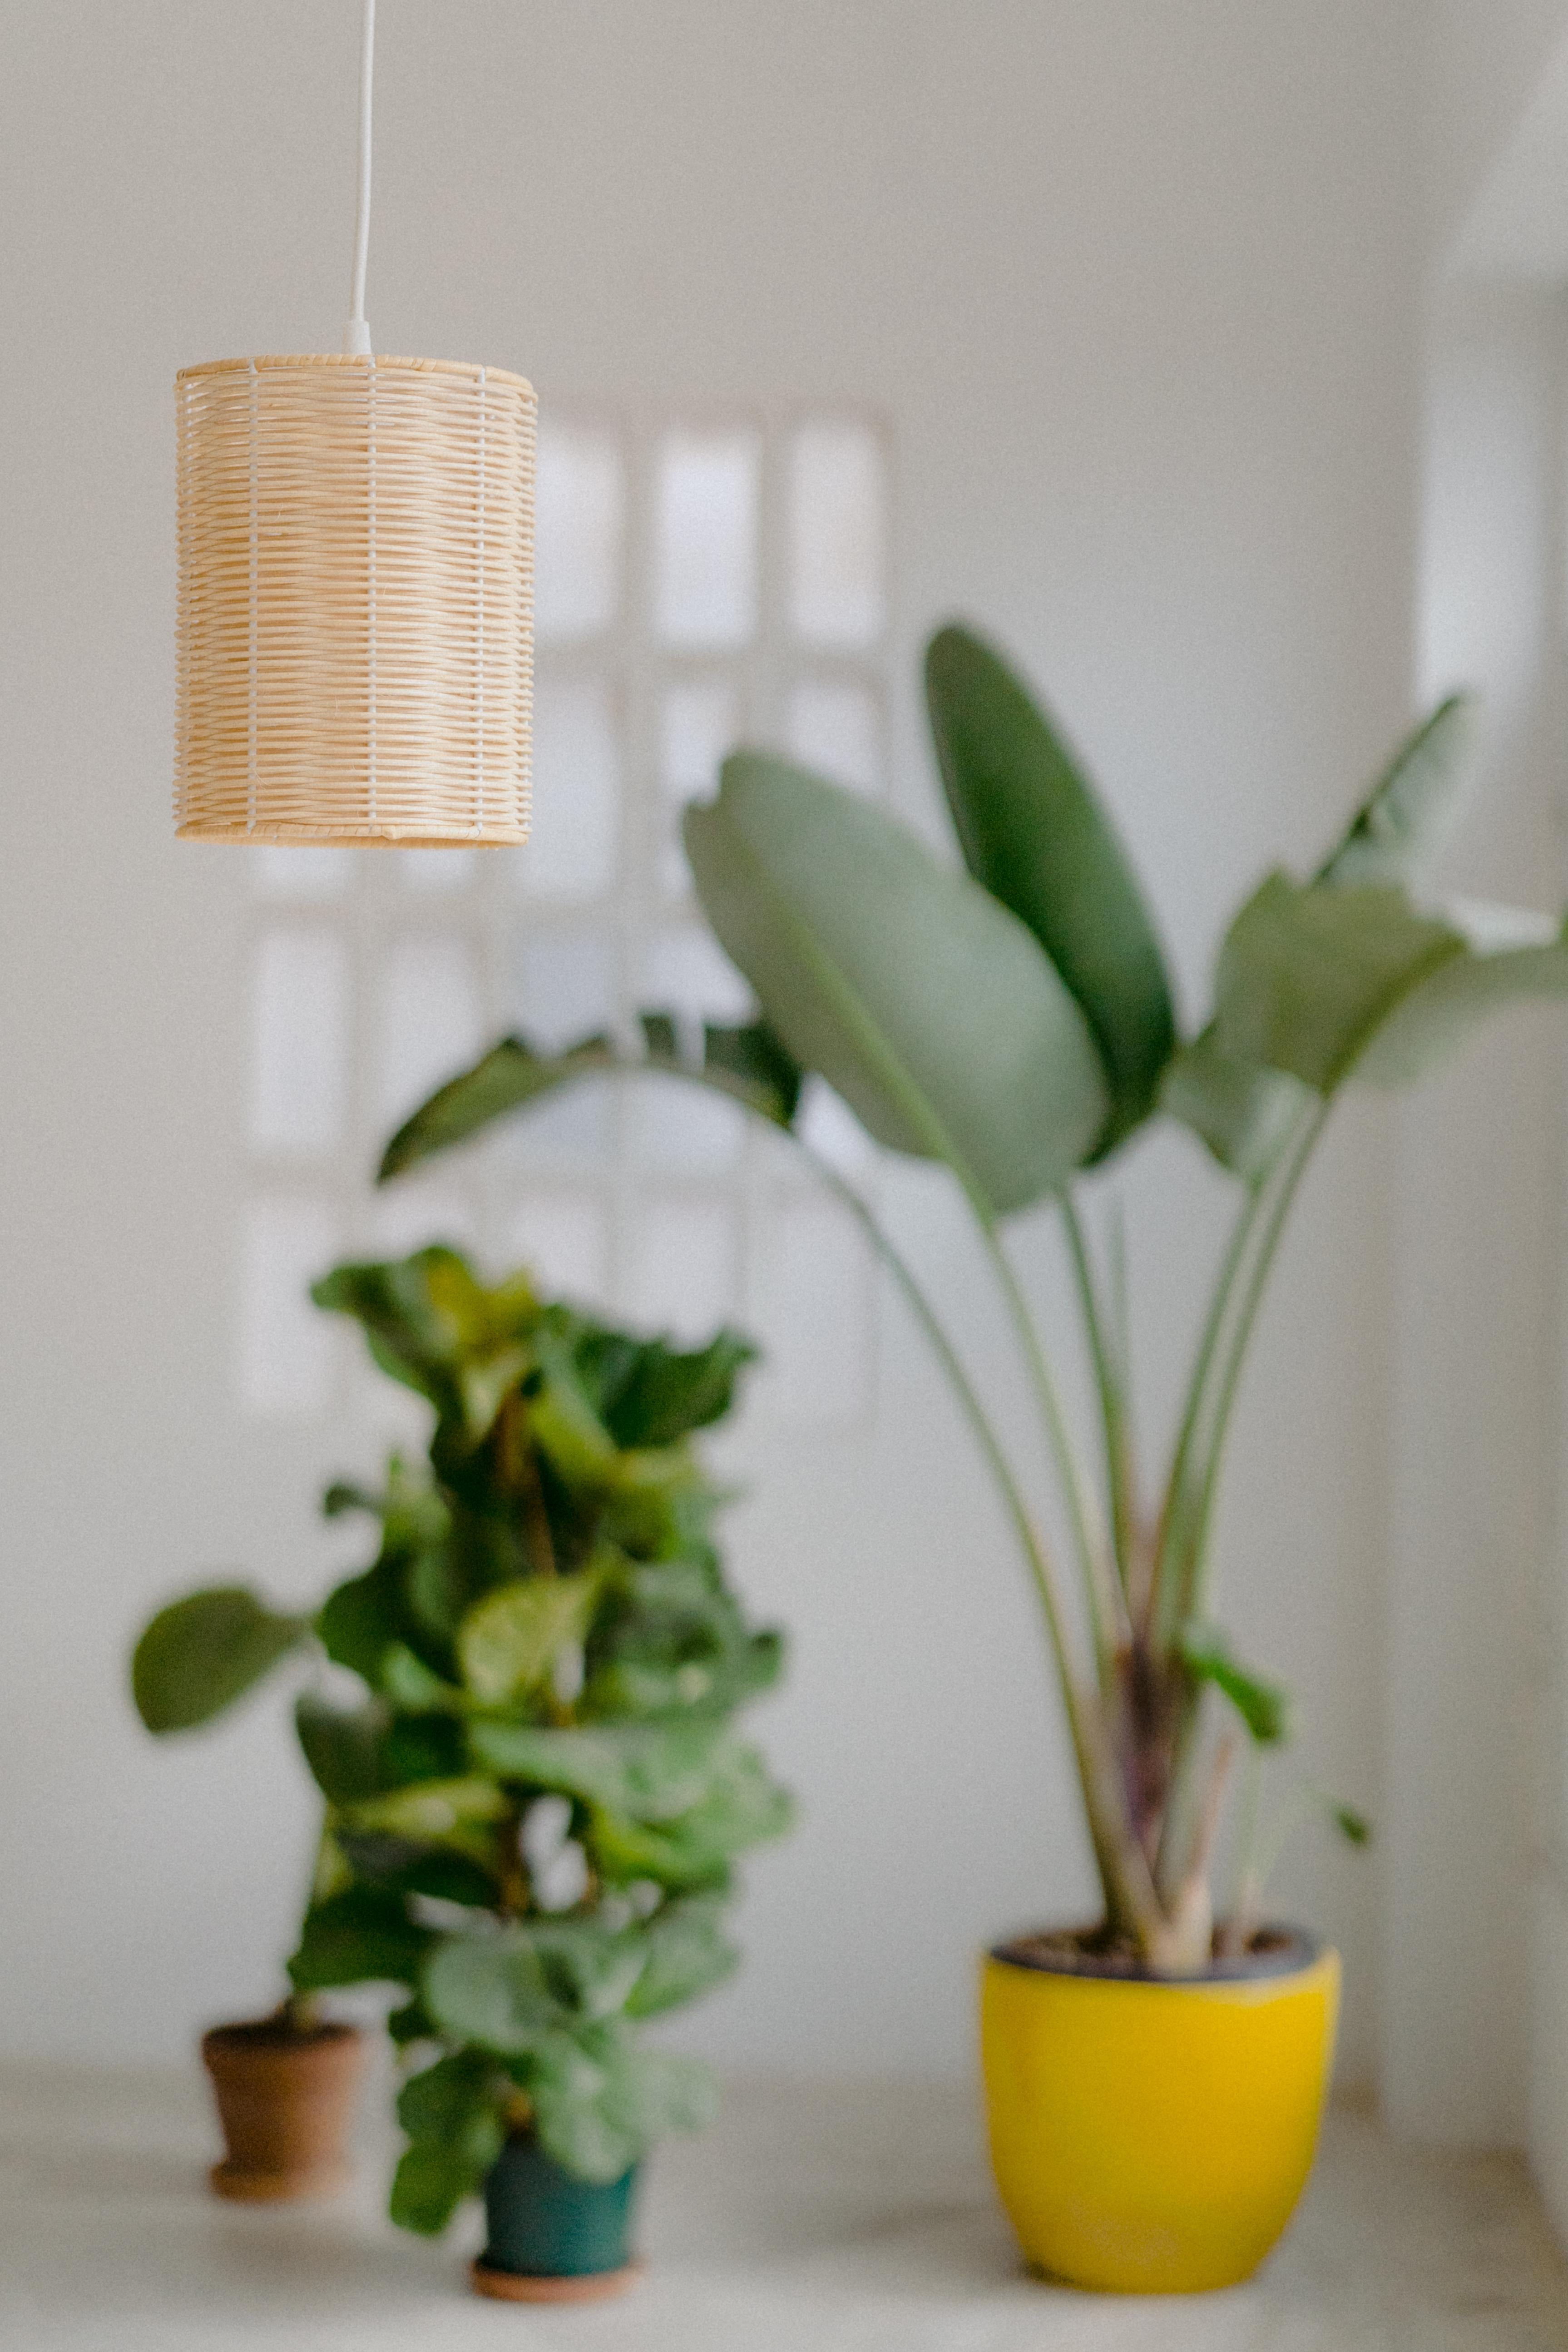 COSTA lamps are designed and manufactured by Mediterranean Objects in Barcelona, Spain. 
They are contemporary small lamps made of natural rattan woven by hand in our artisan workshop. 
It is recommended to use them with warm bulbs, led, filament